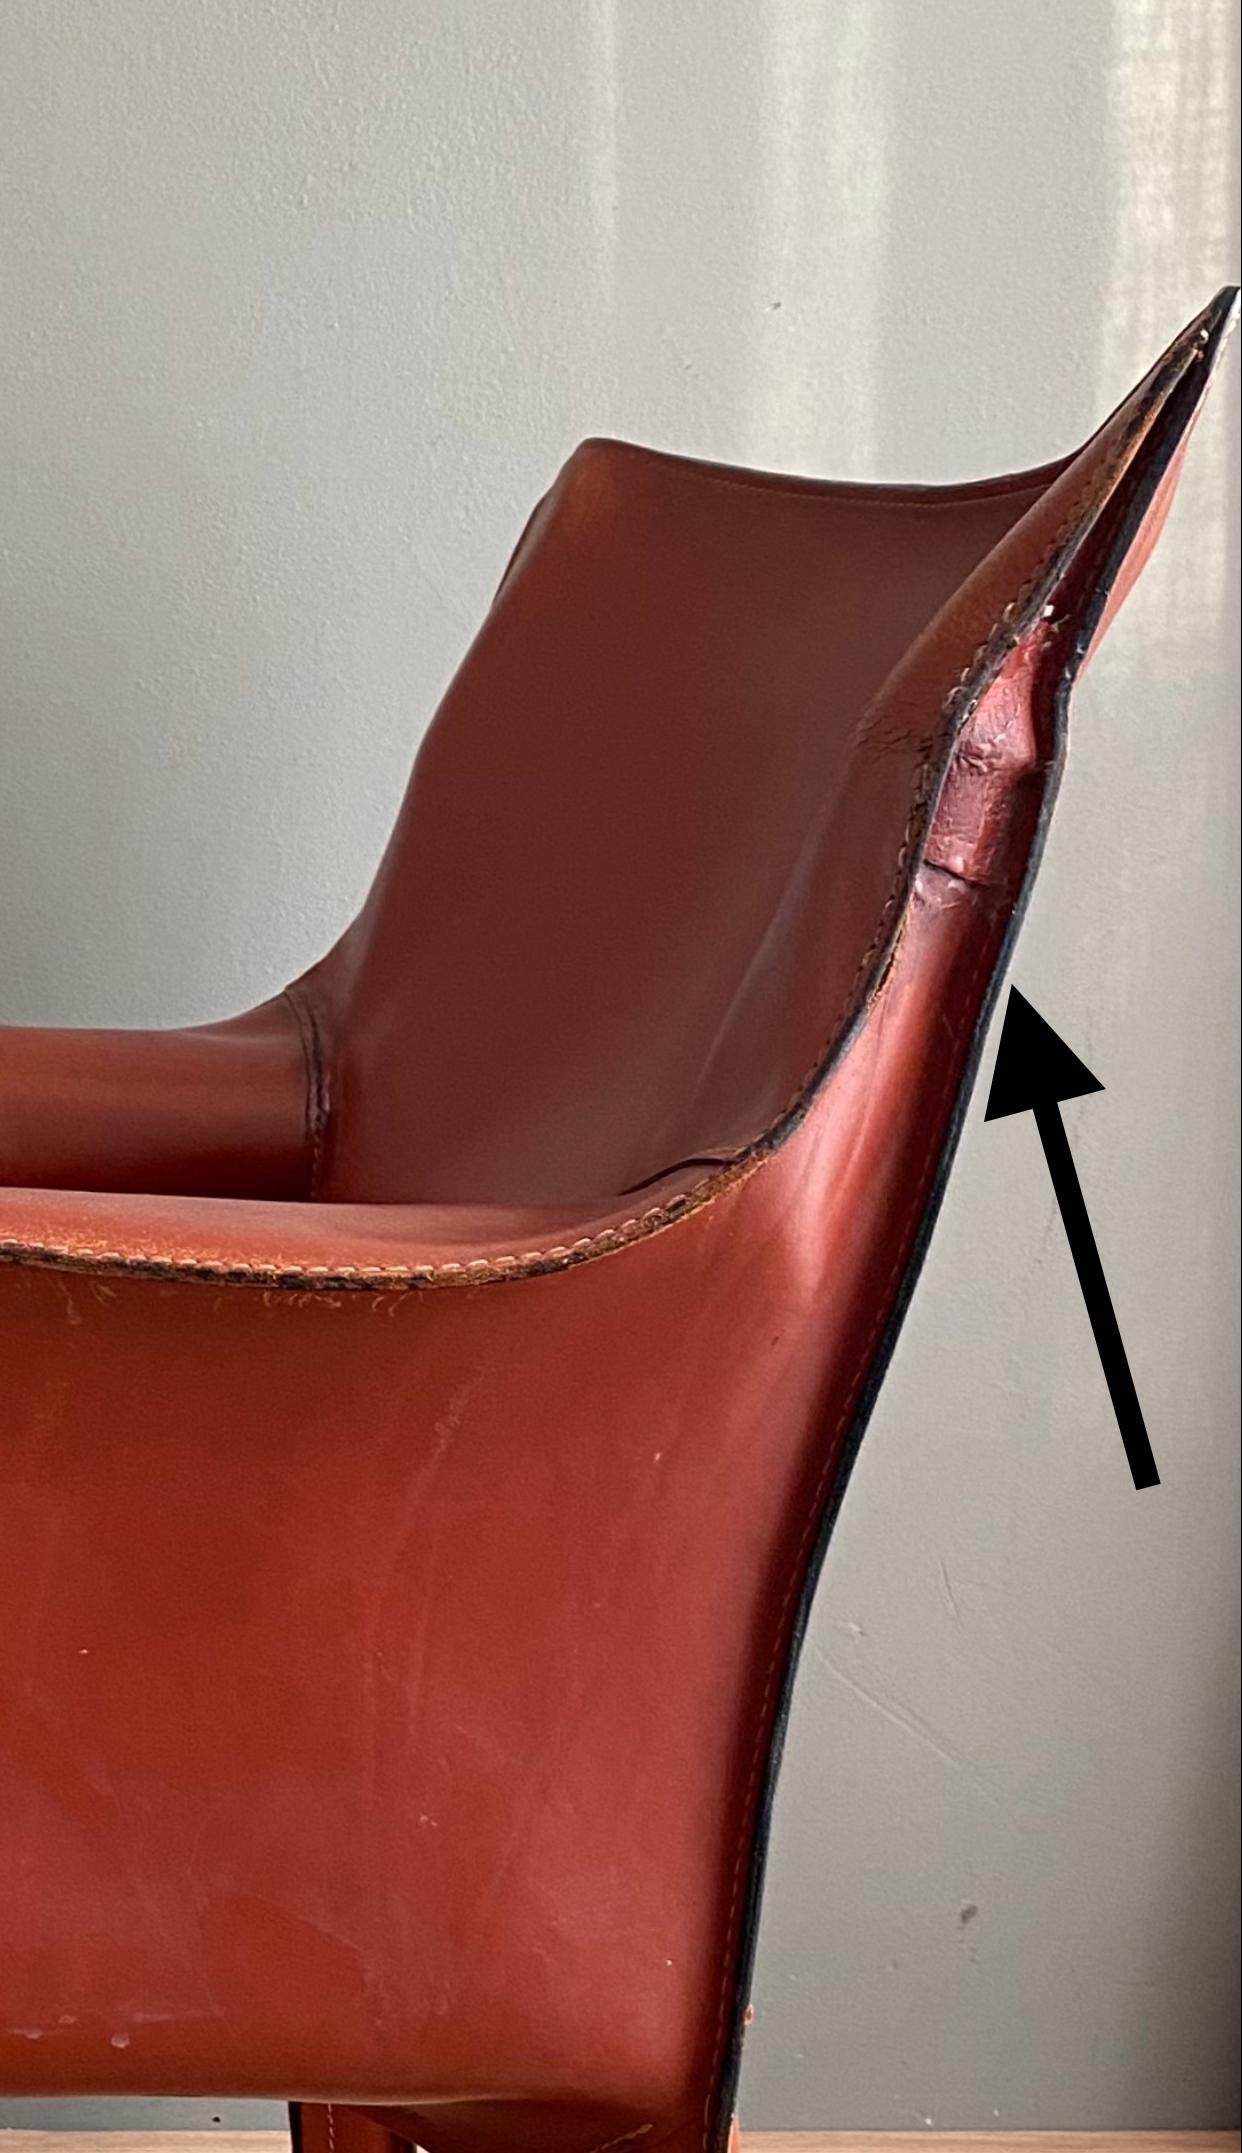 Cognac Leather Cab Lounge Chair by Mario Bellini, 1970s For Sale 3